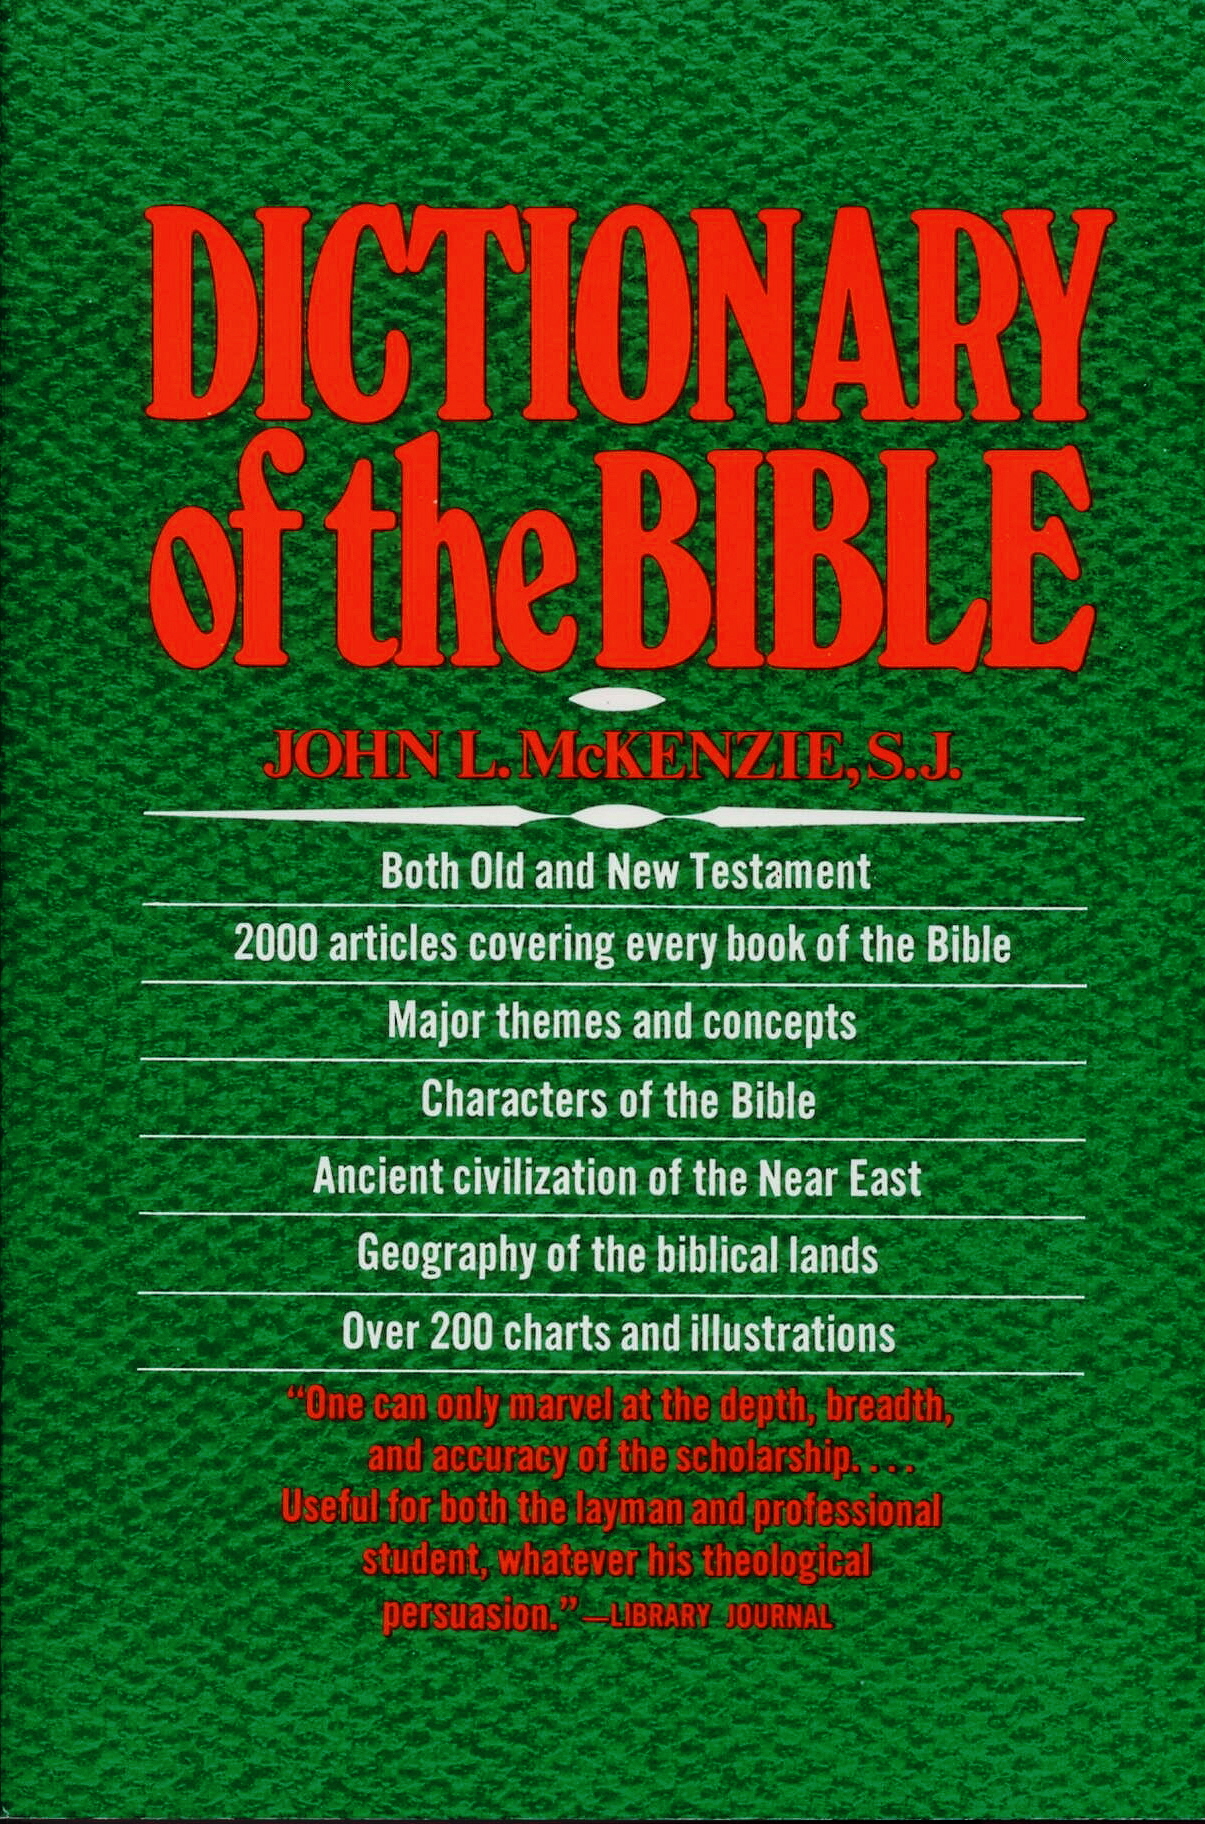 Touchstone Dictionary Of The Bible by McKenzie